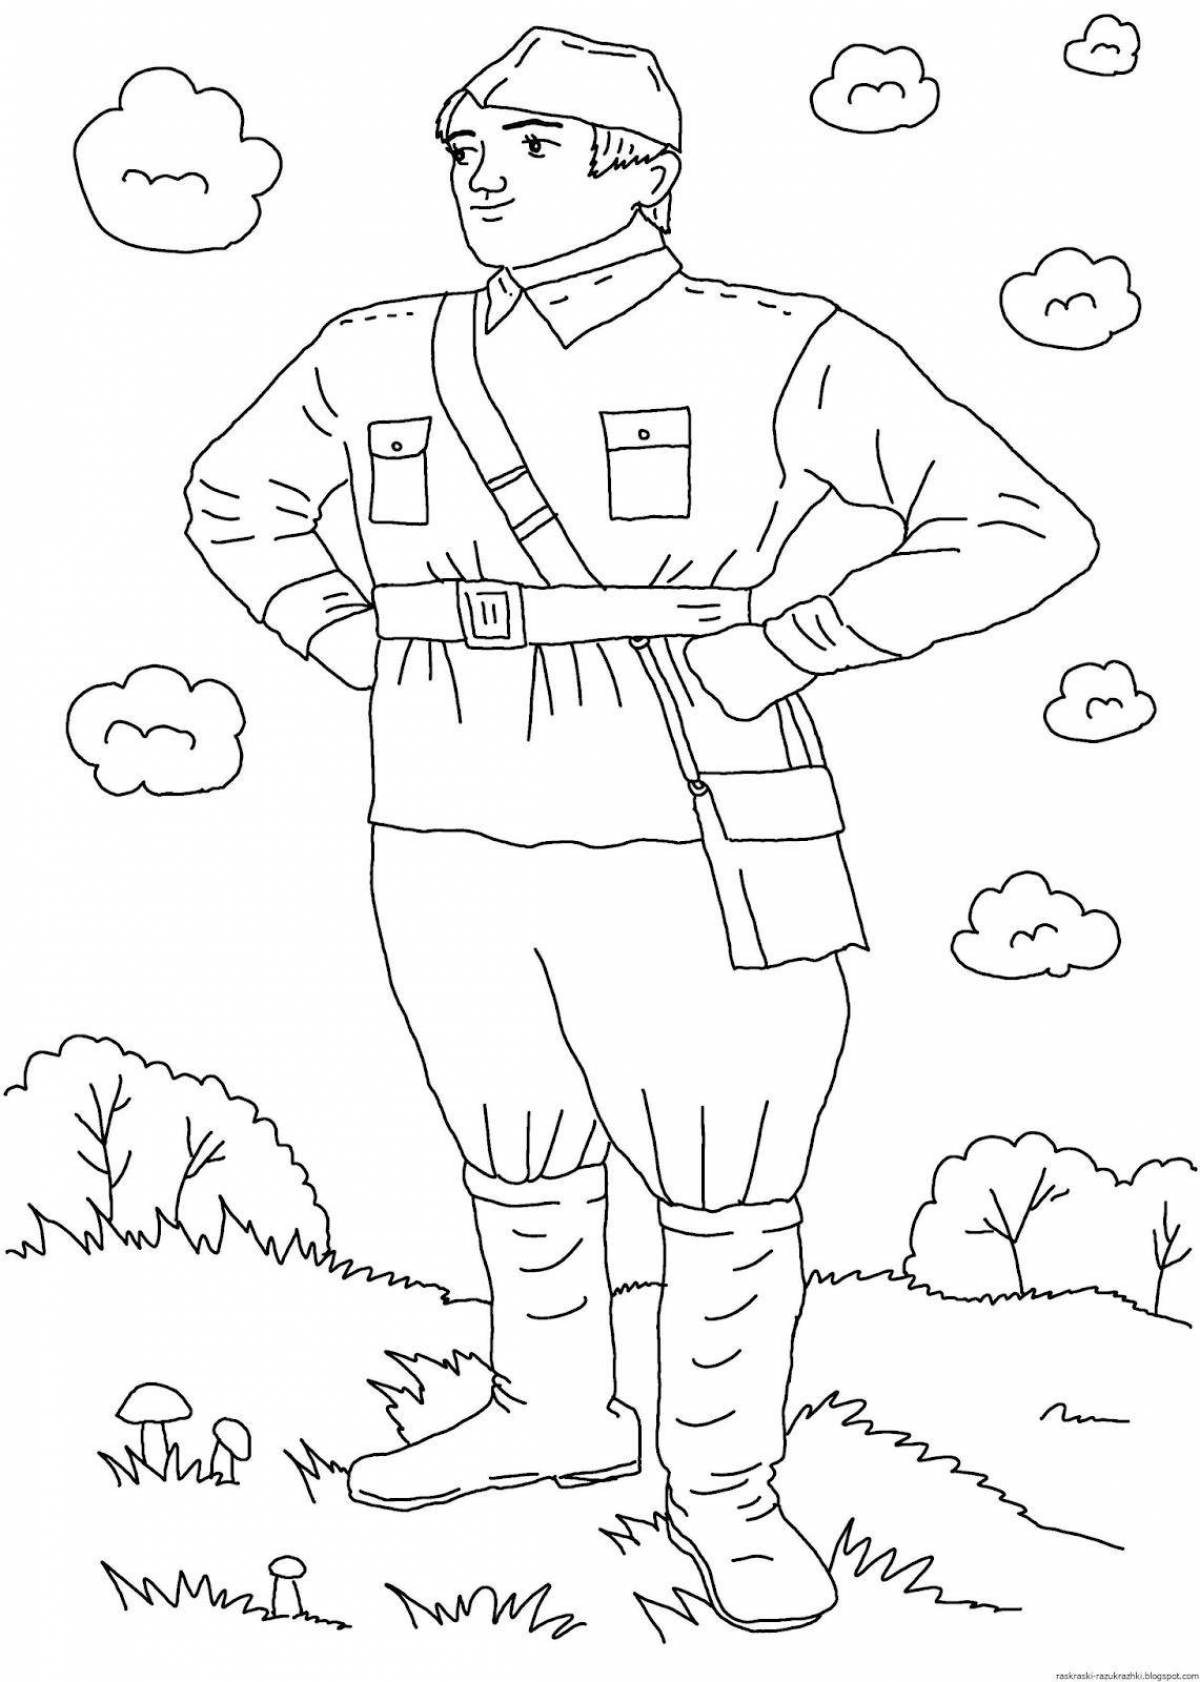 Funny coloring drawing of a soldier from a schoolboy